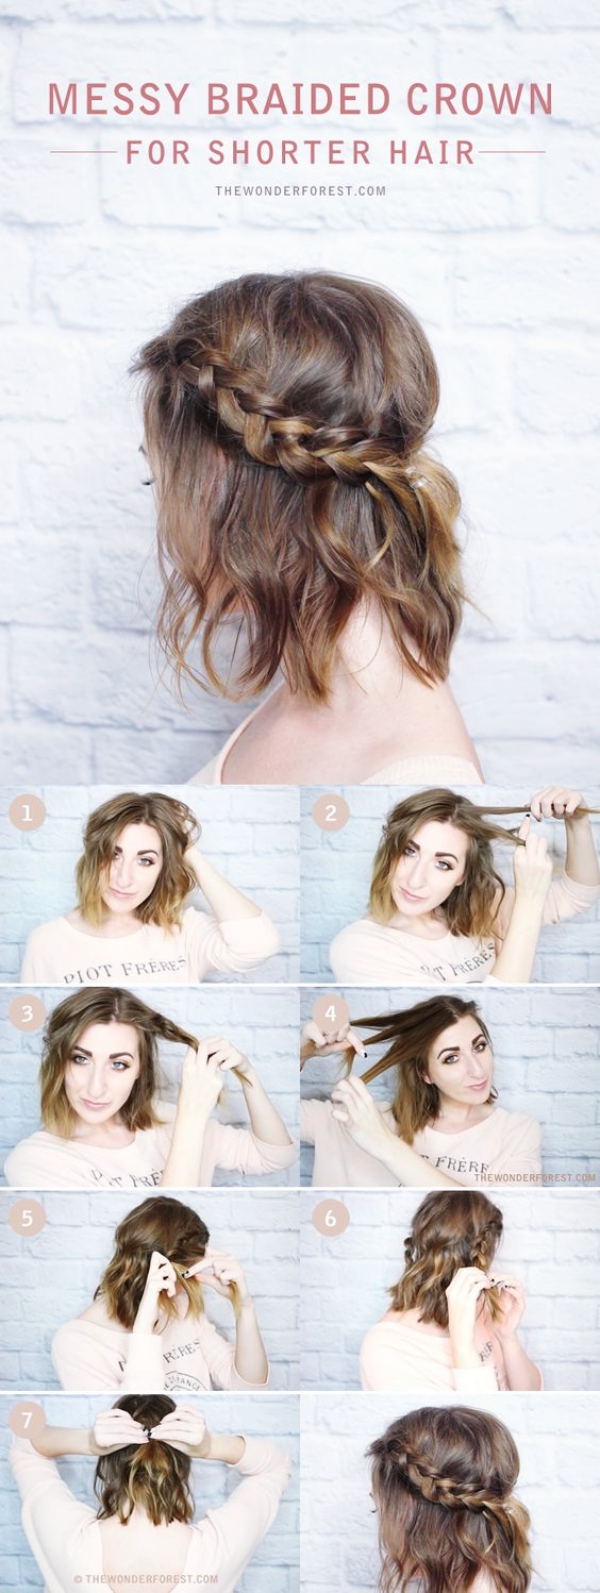 40 Easy Hairstyles No Haircuts For Women With Short Hair